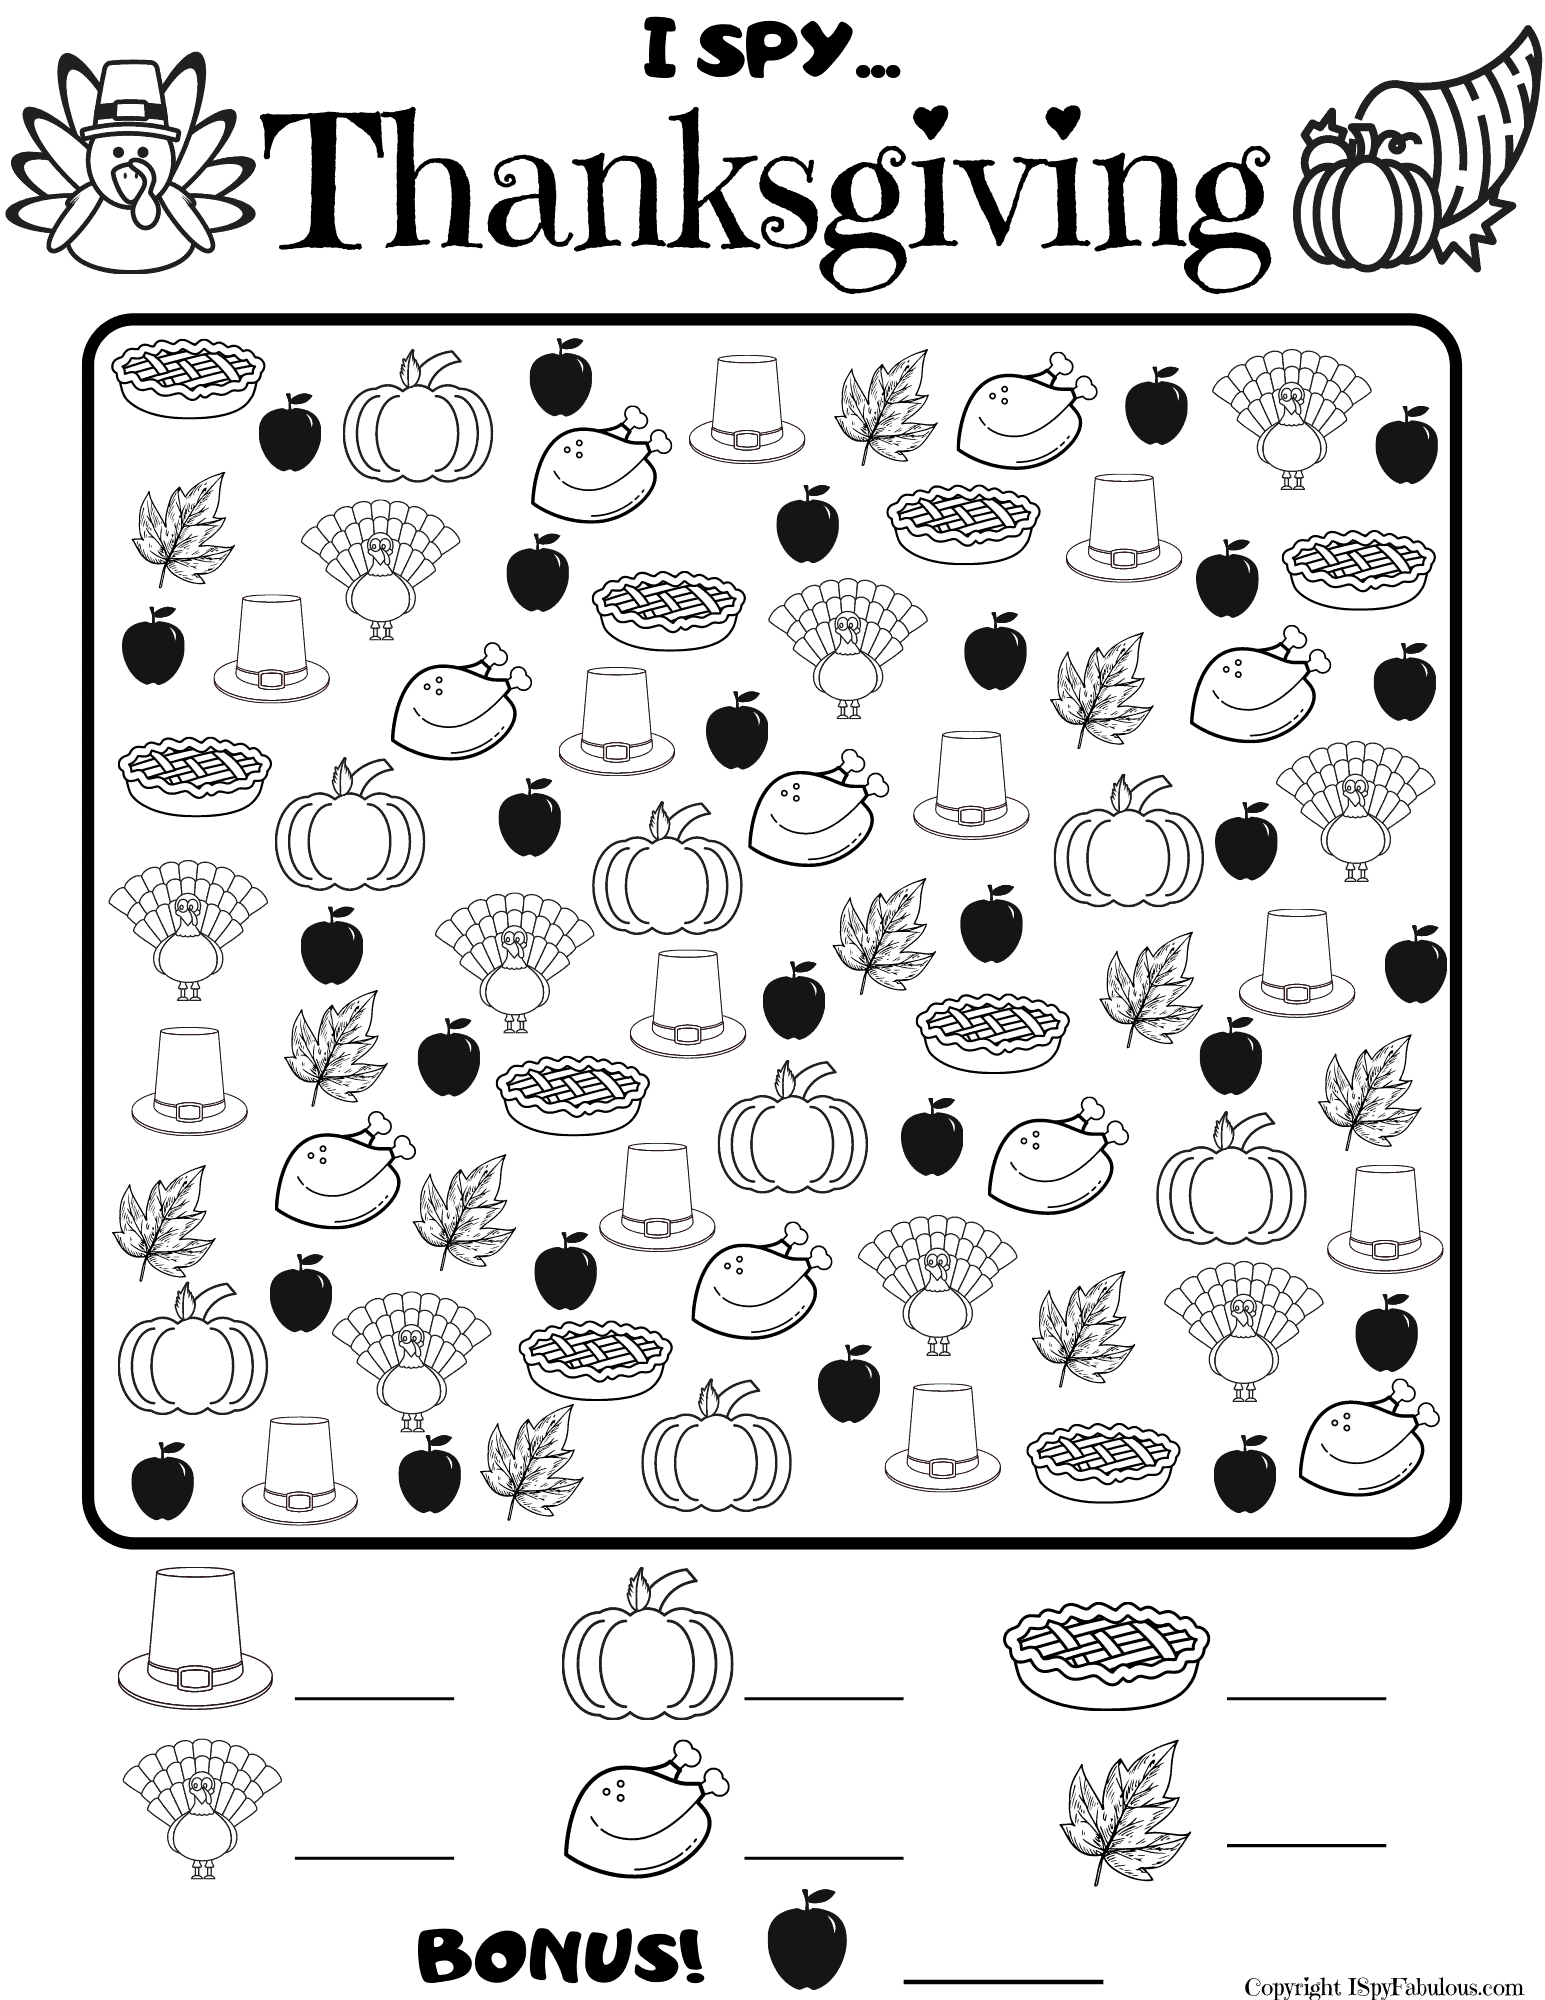  thanksgiving activities for kids